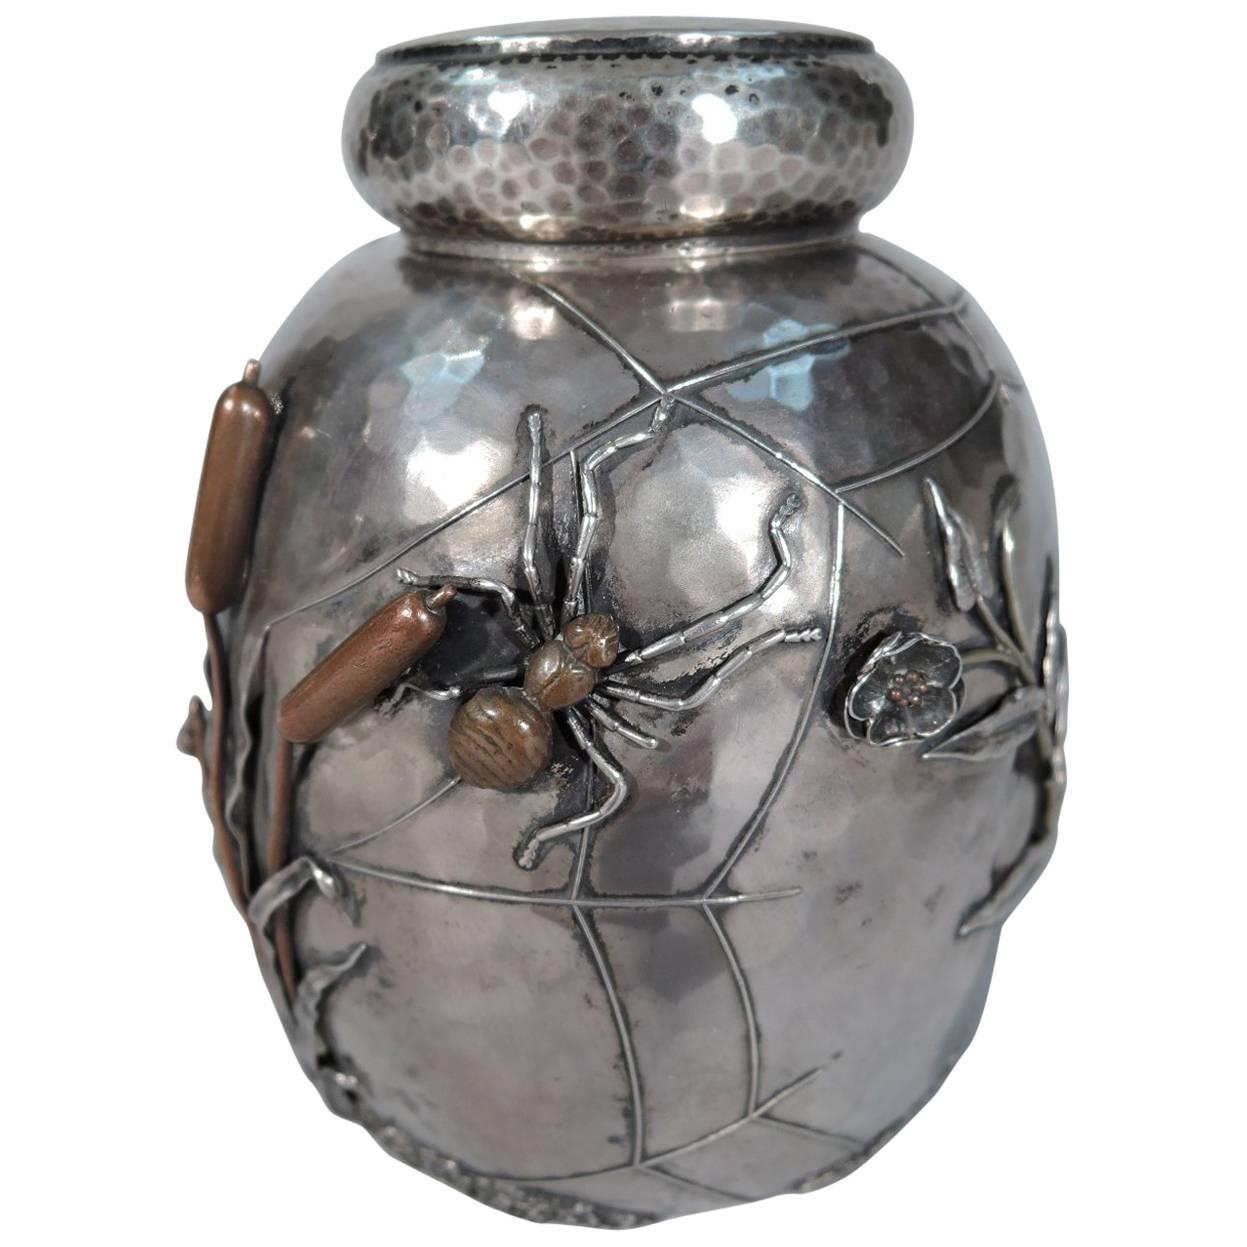 Fabulous Japonesque Sterling Silver and Mixed Metal Tea Caddy by Gorham